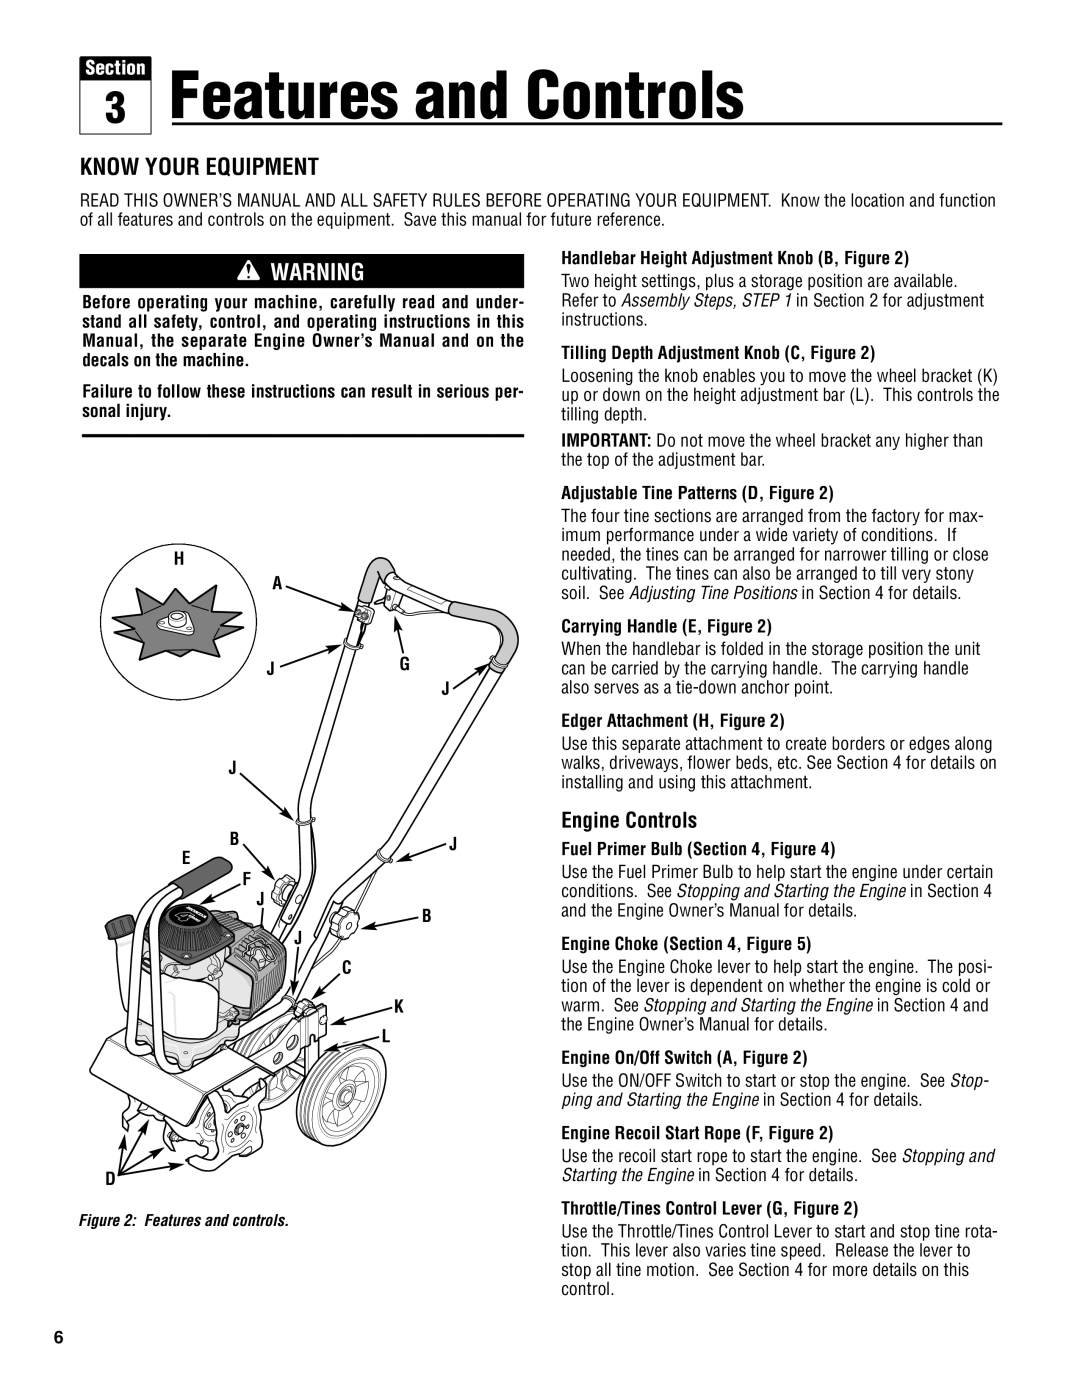 Troy-Bilt 148H Features and Controls, Know Your Equipment, Engine Controls, Handlebar Height Adjustment Knob B, Figure 